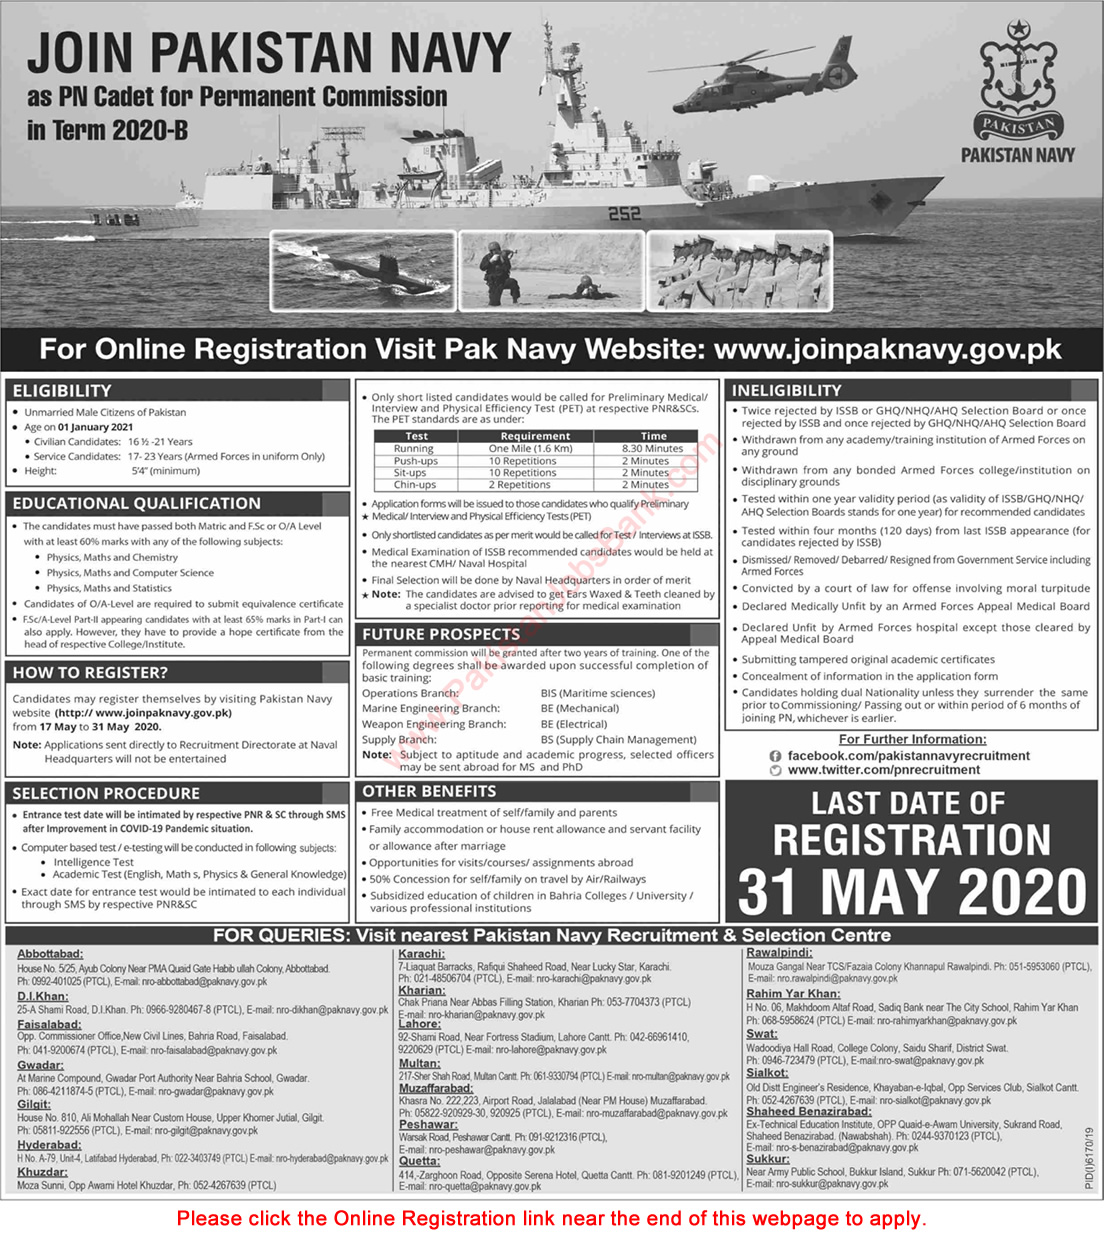 Join Pakistan Navy as PN Cadet May 2020 Online Registration for Permanent Commission in Term 2020-B Latest